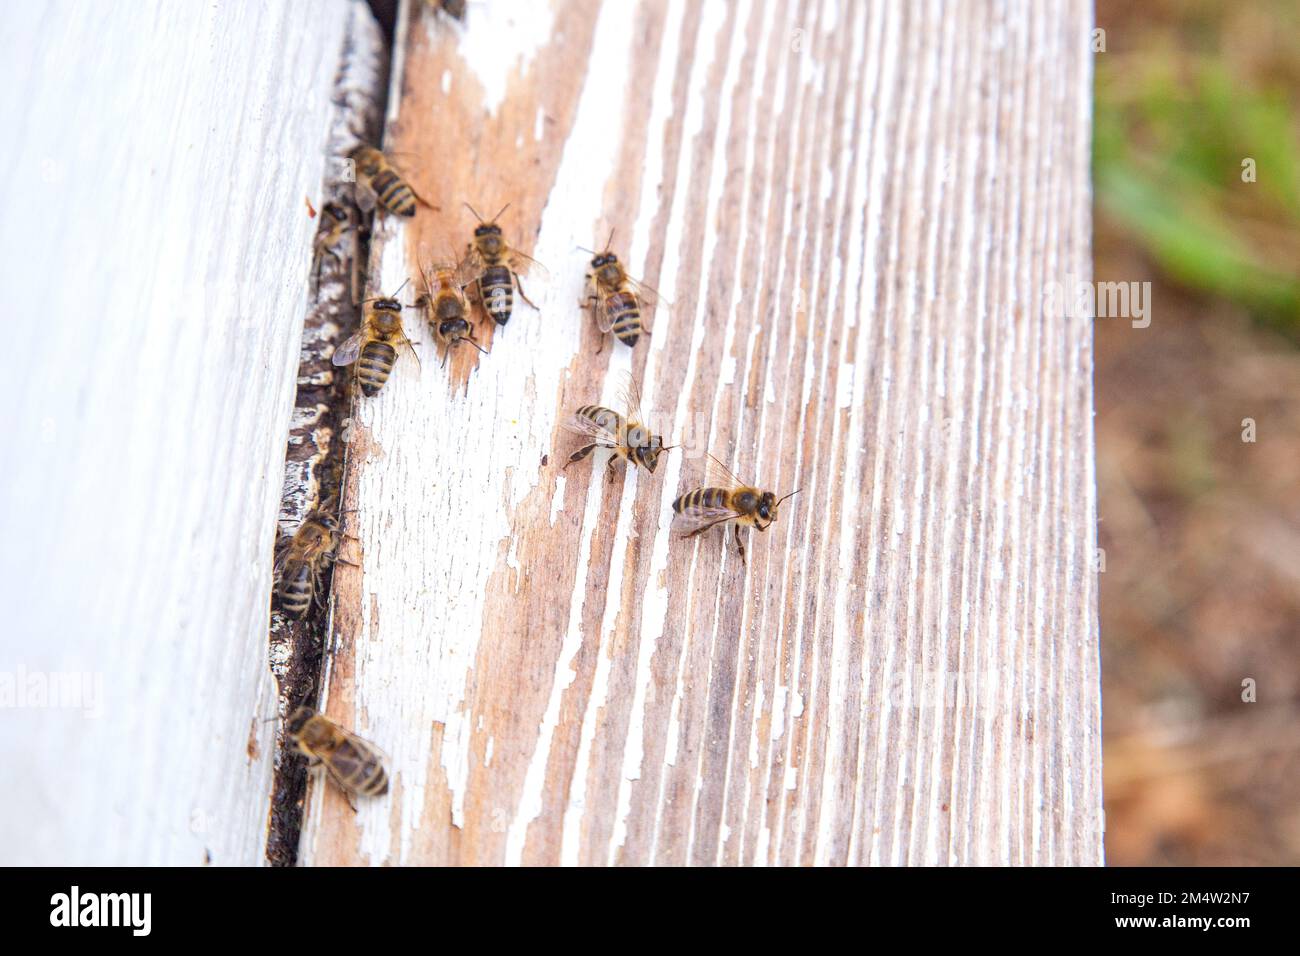 Plenty of bees at the entrance of beehive in apiary. Busy bees, close up view of the swarming bees on white plank. Stock Photo